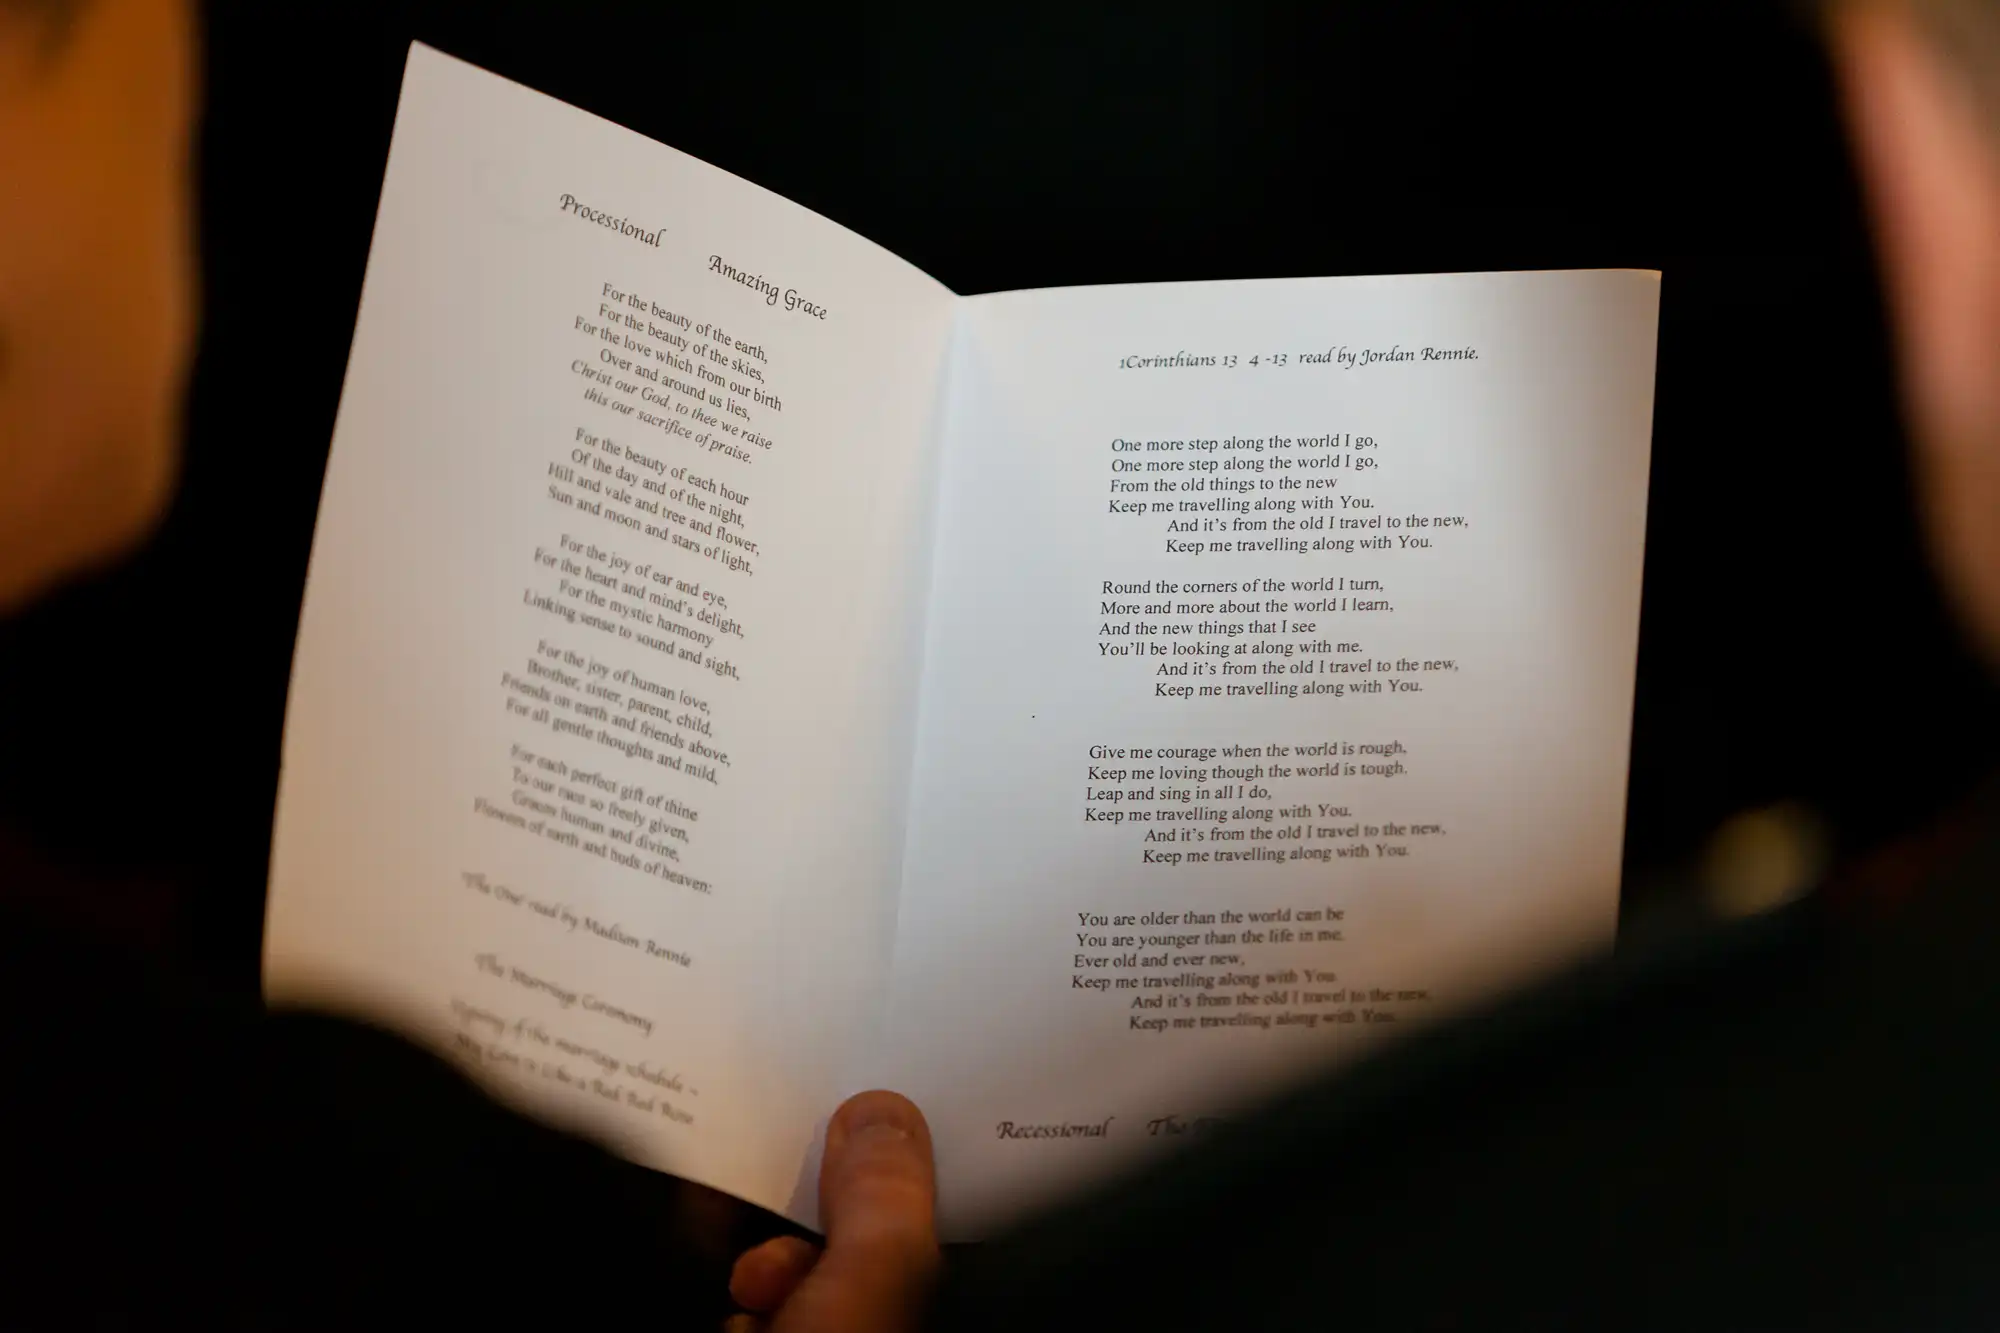 Two hands holding an open book with a visible poem titled "sometimes on a day full of wistful sprinkle.